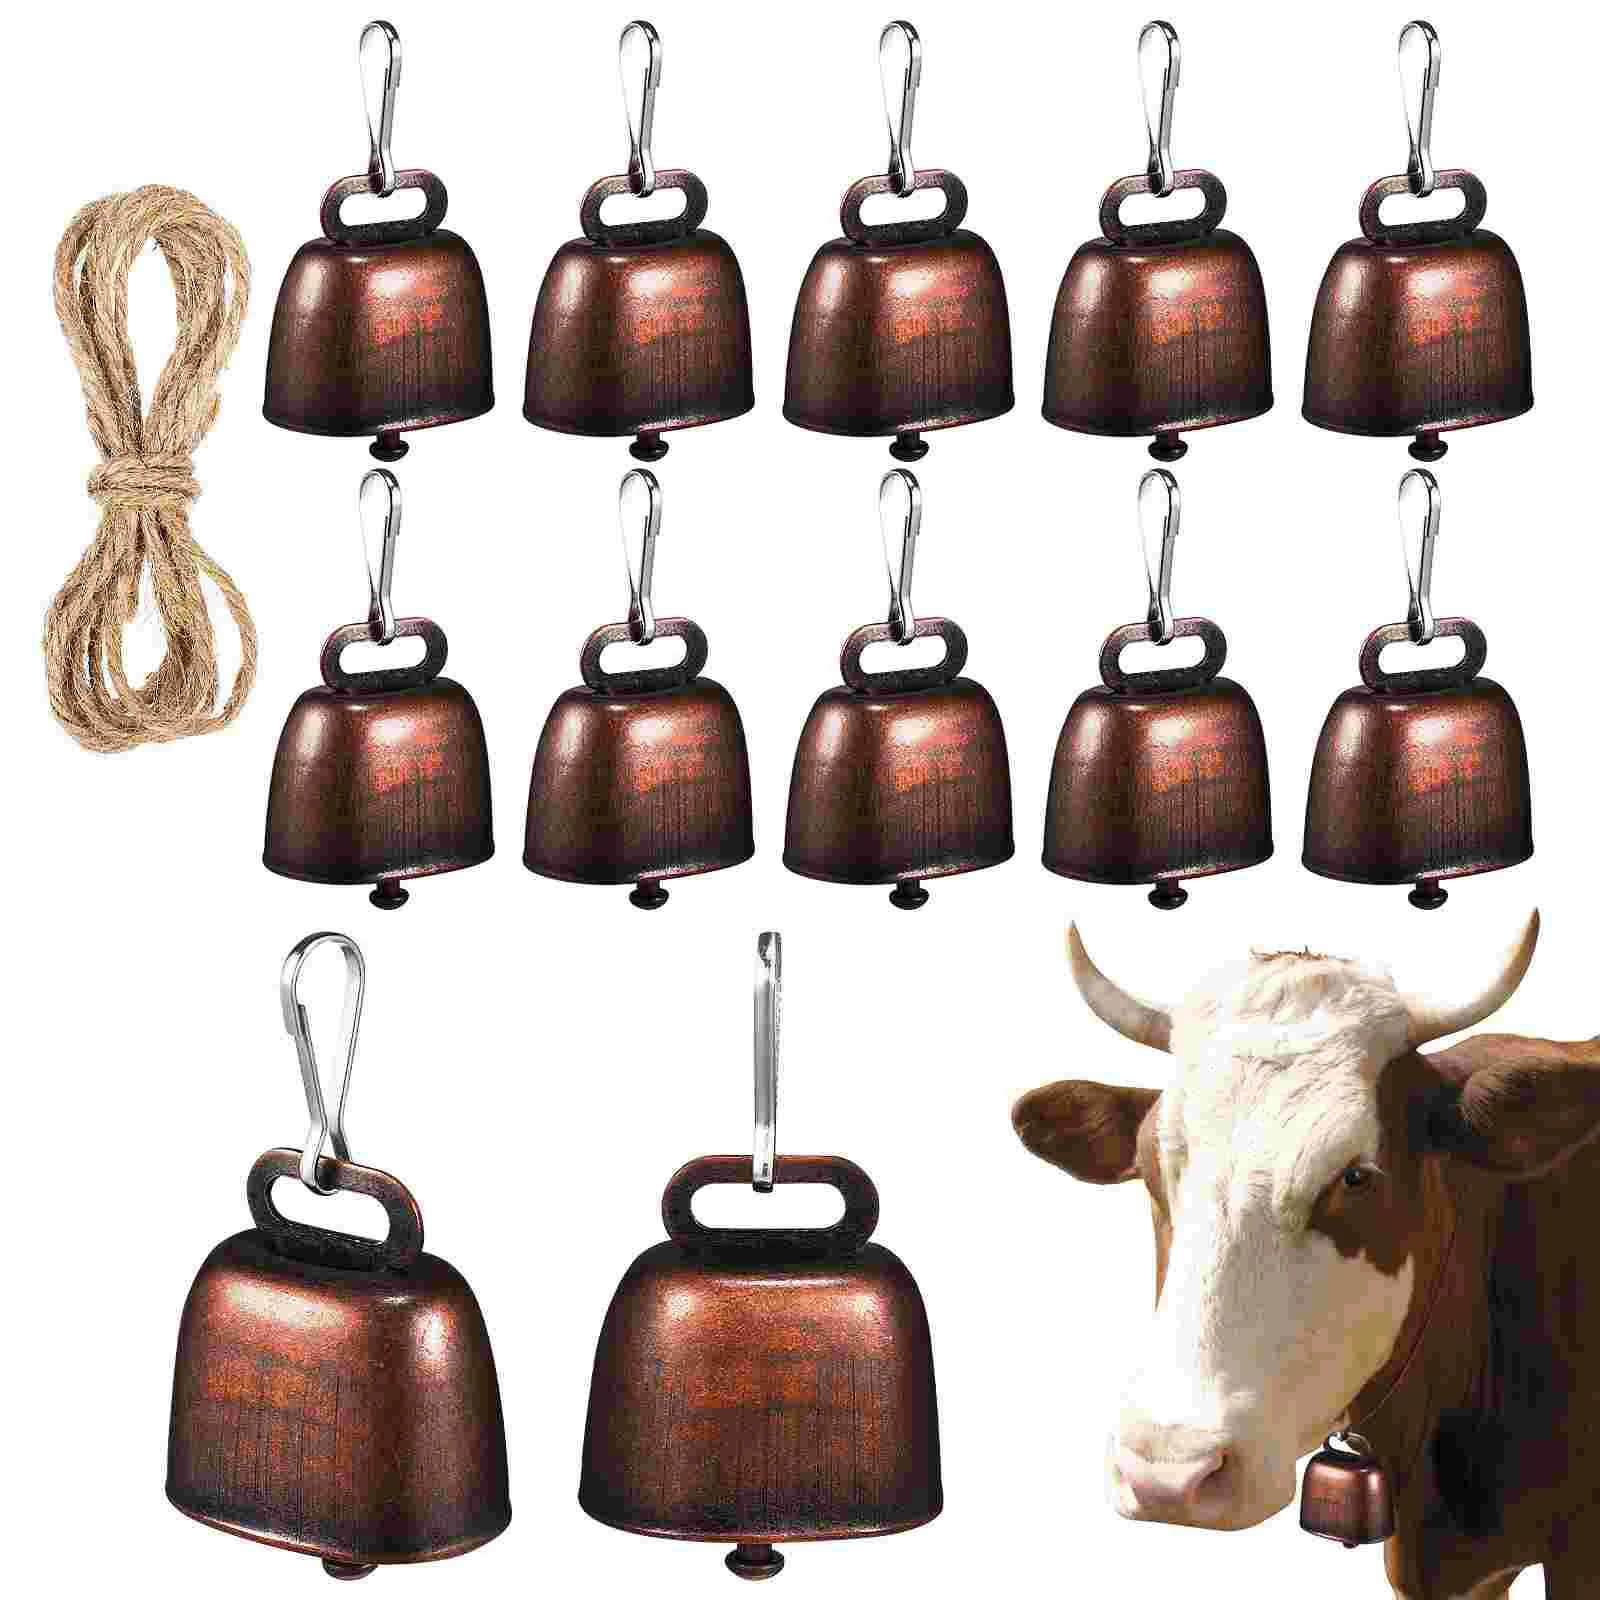 

12Pcs Grazing Cow Bells Anti-theft Farm Animal Loud Bronze Bell for Cattle Horse Sheep Goat